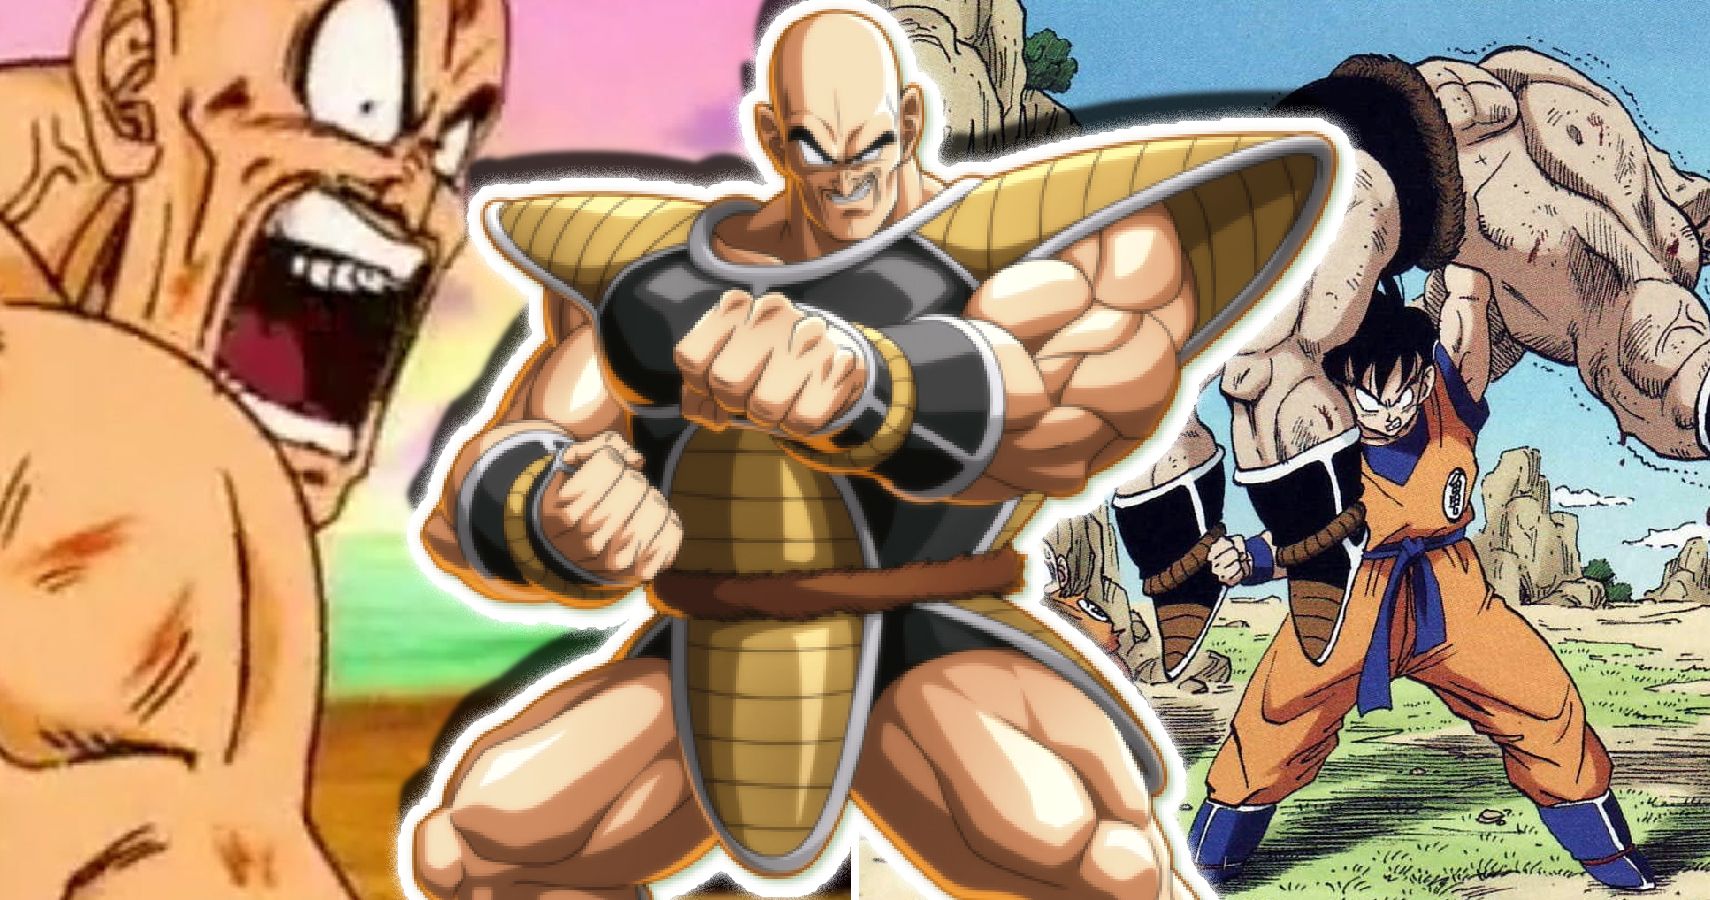 25 Crazy Things You Didnt Know About Nappa From Dragon Ball Z